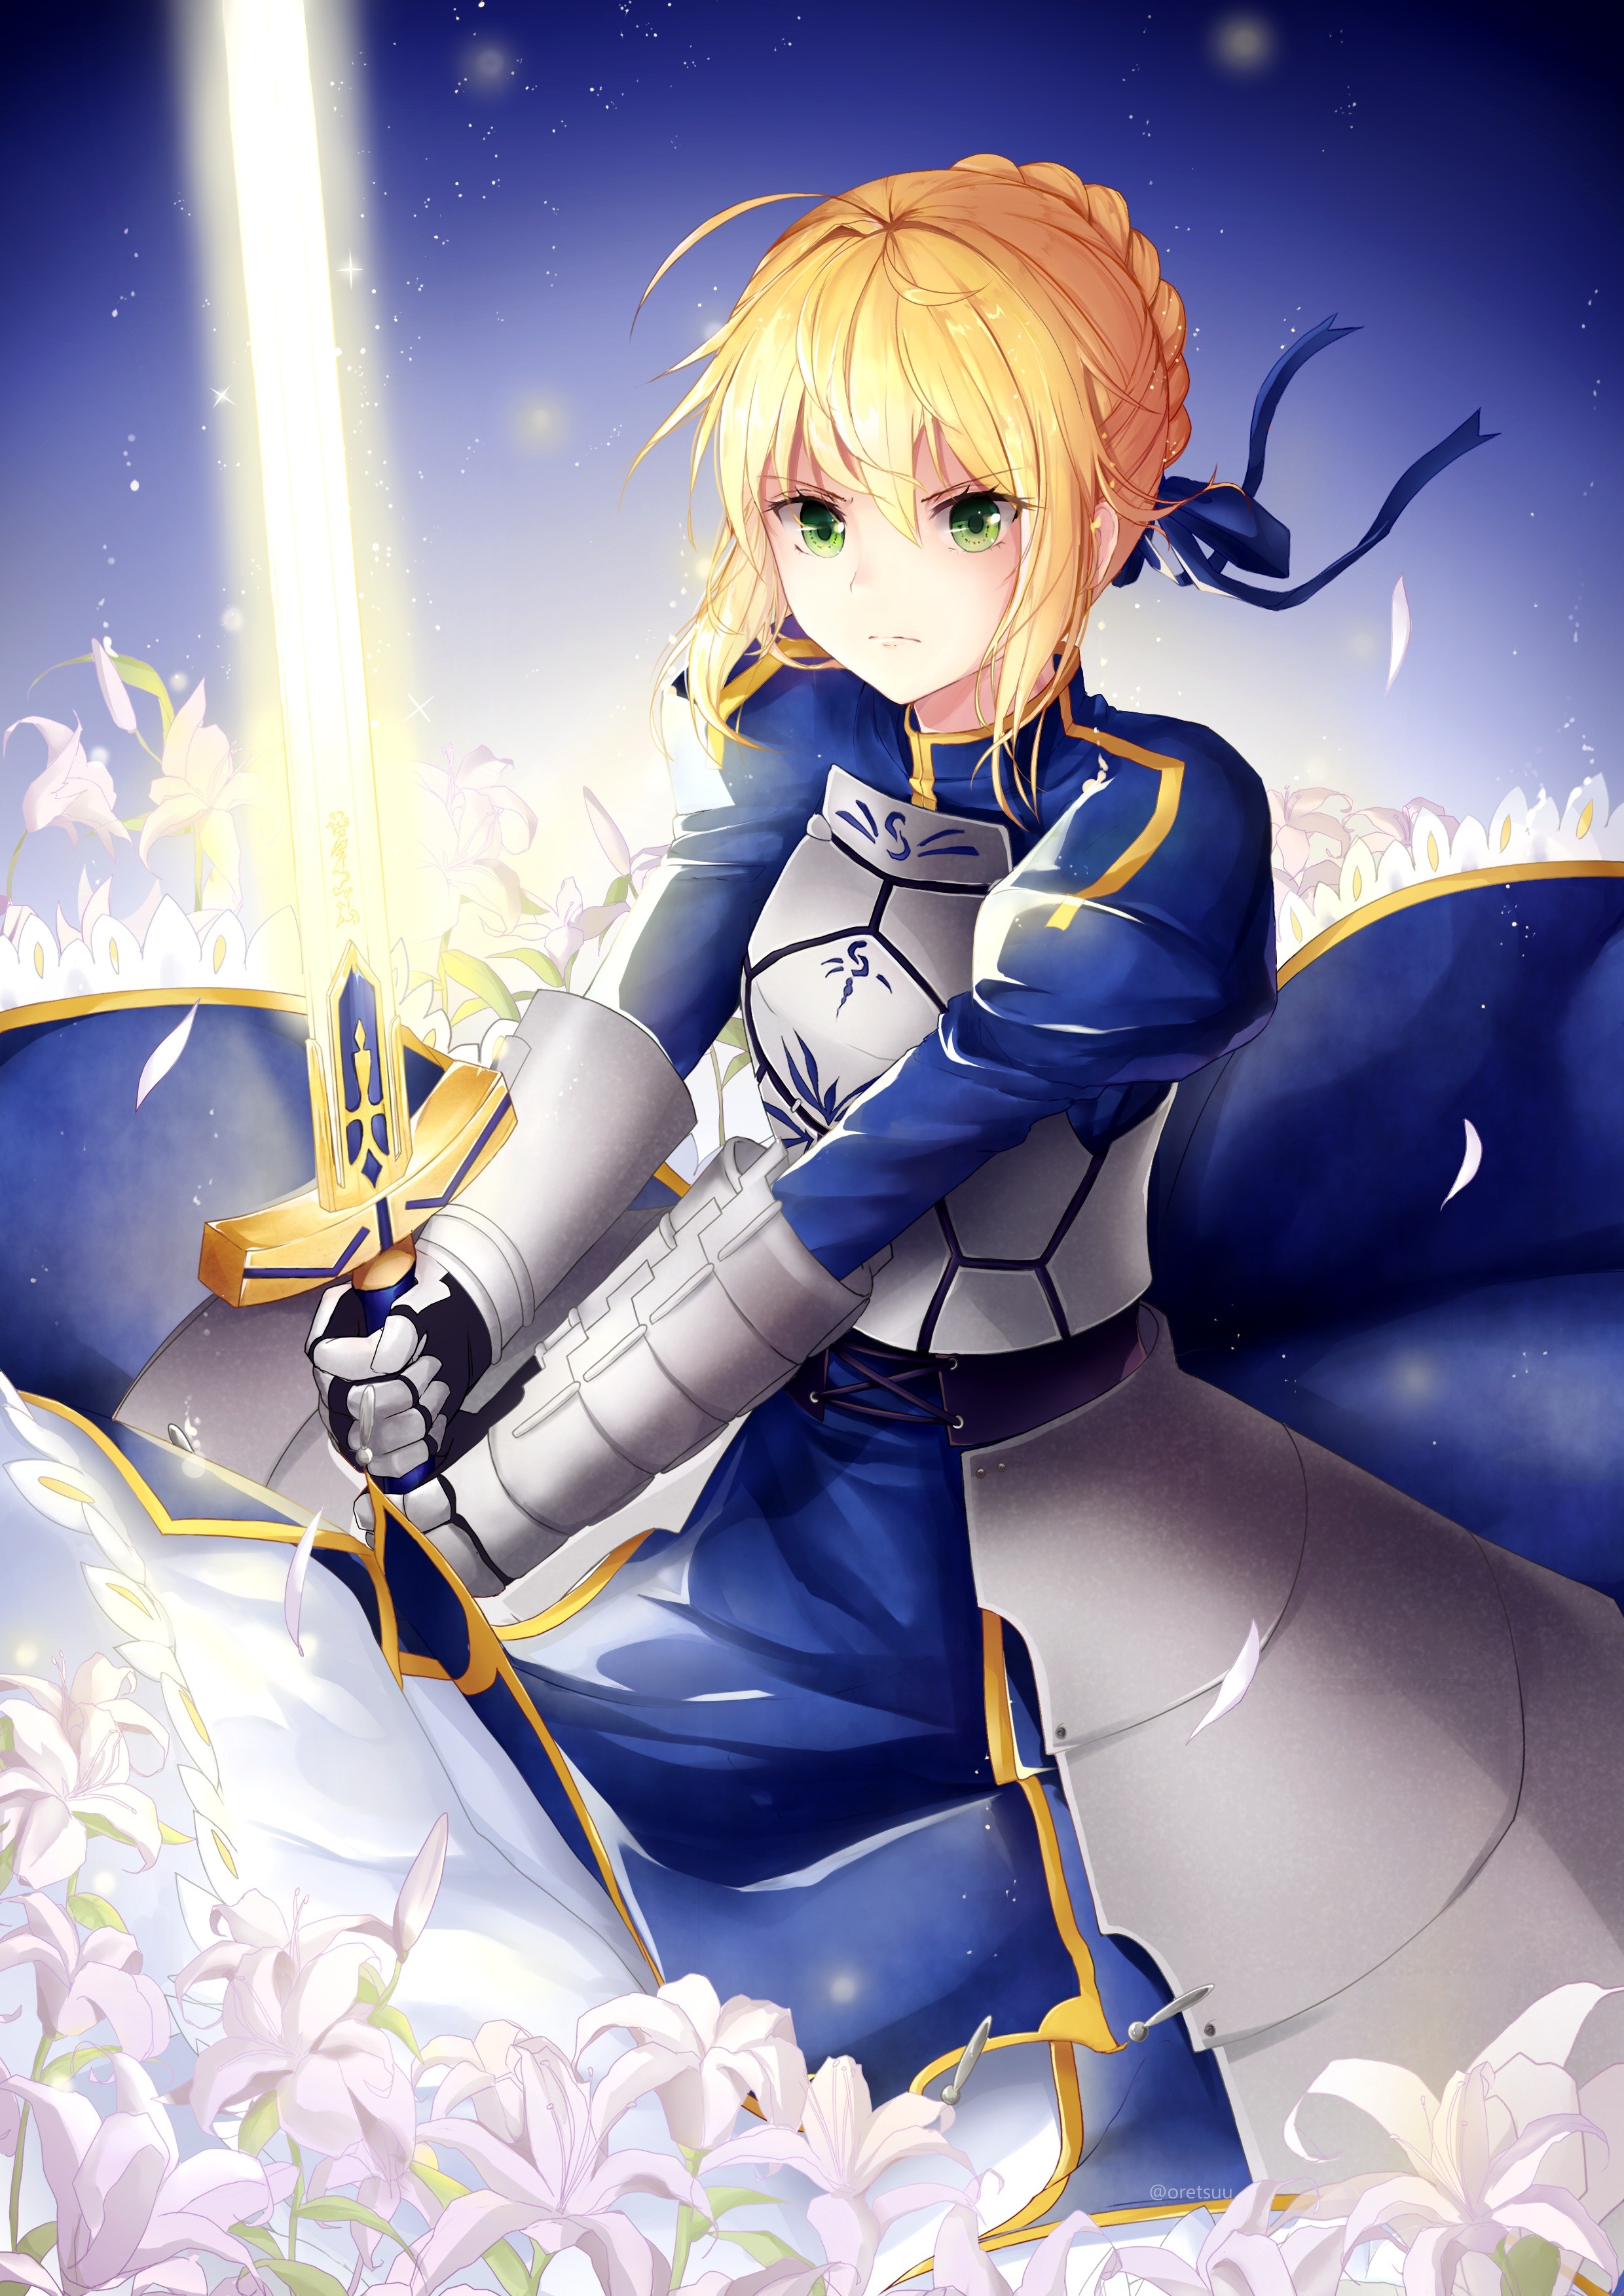 Anime 2480x3507 anime anime girls Fate/Stay Night Saber armor dress sword Fate series Pixiv women with swords weapon fantasy art fantasy girl blonde green eyes